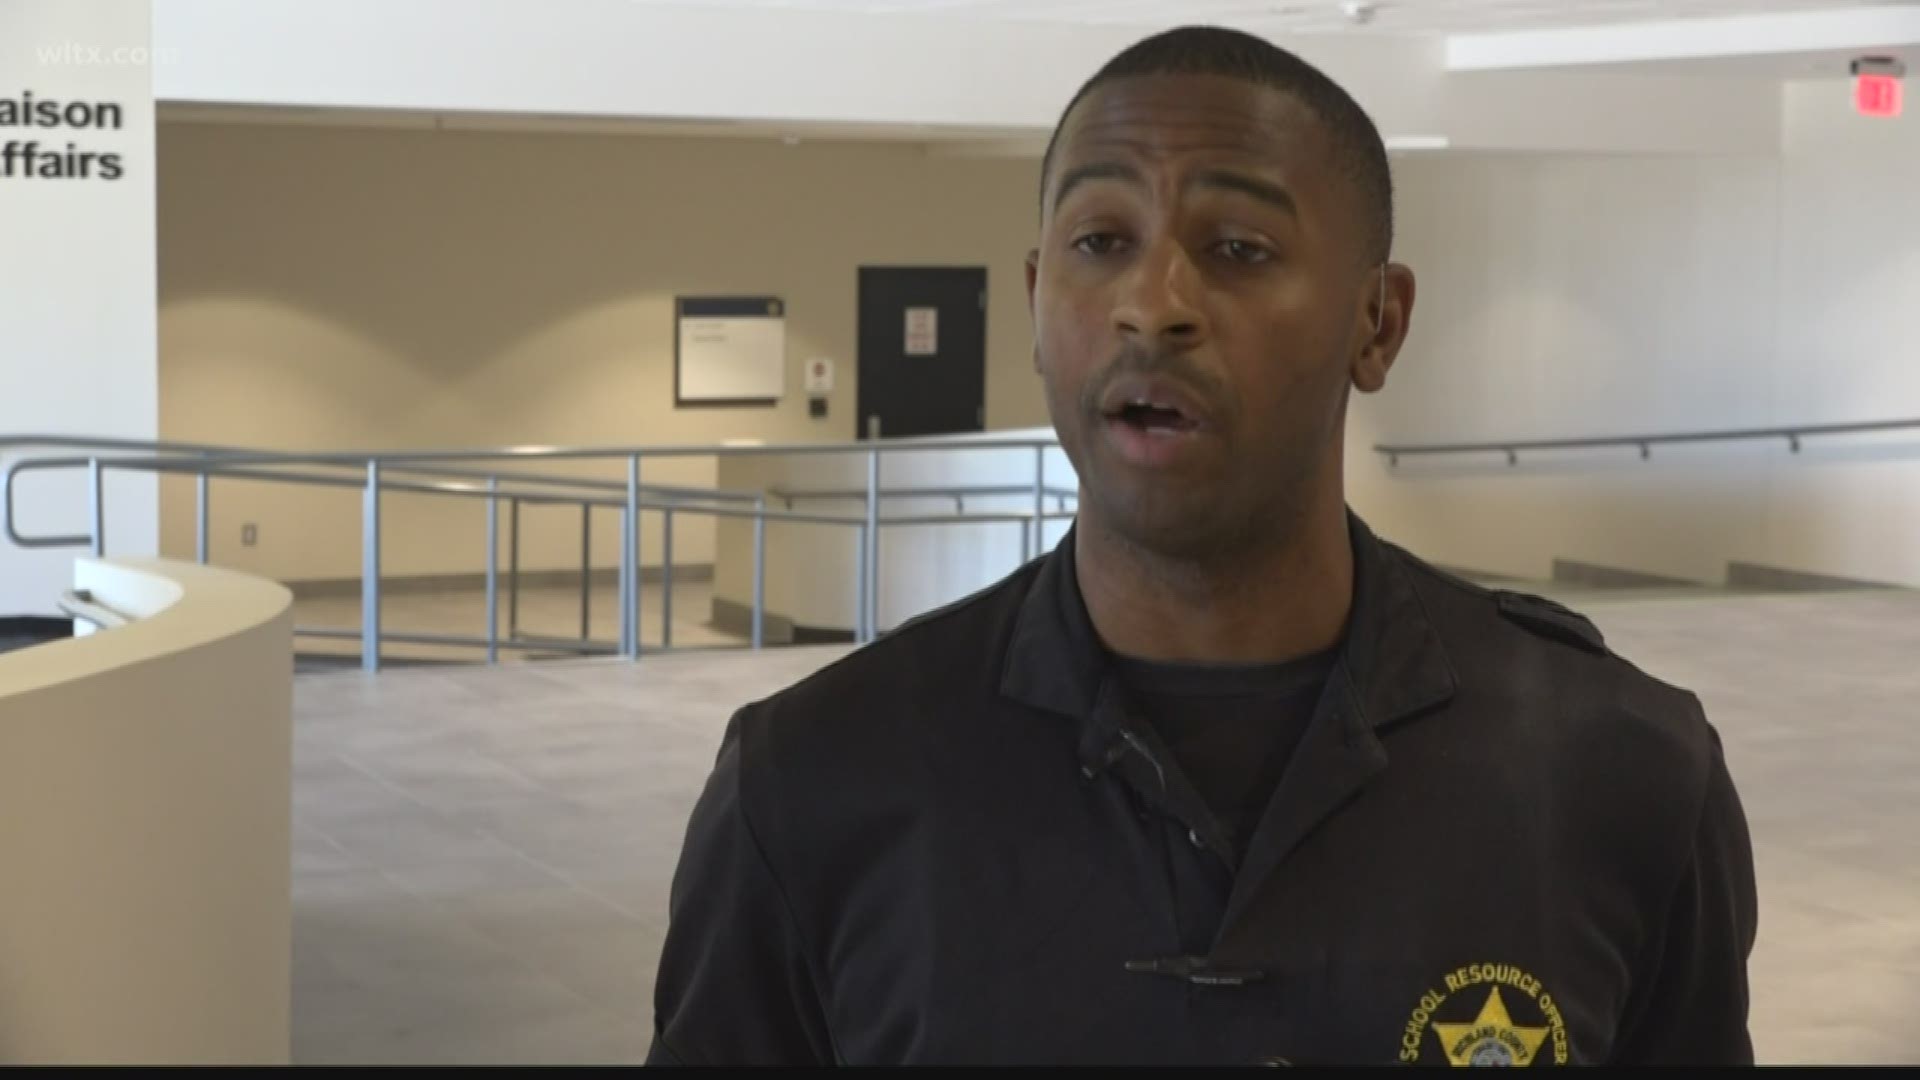 Former Gamecock basketball player and Richland County School resource officer Jamel Bradley has been fired after allegations he improperly touched a student